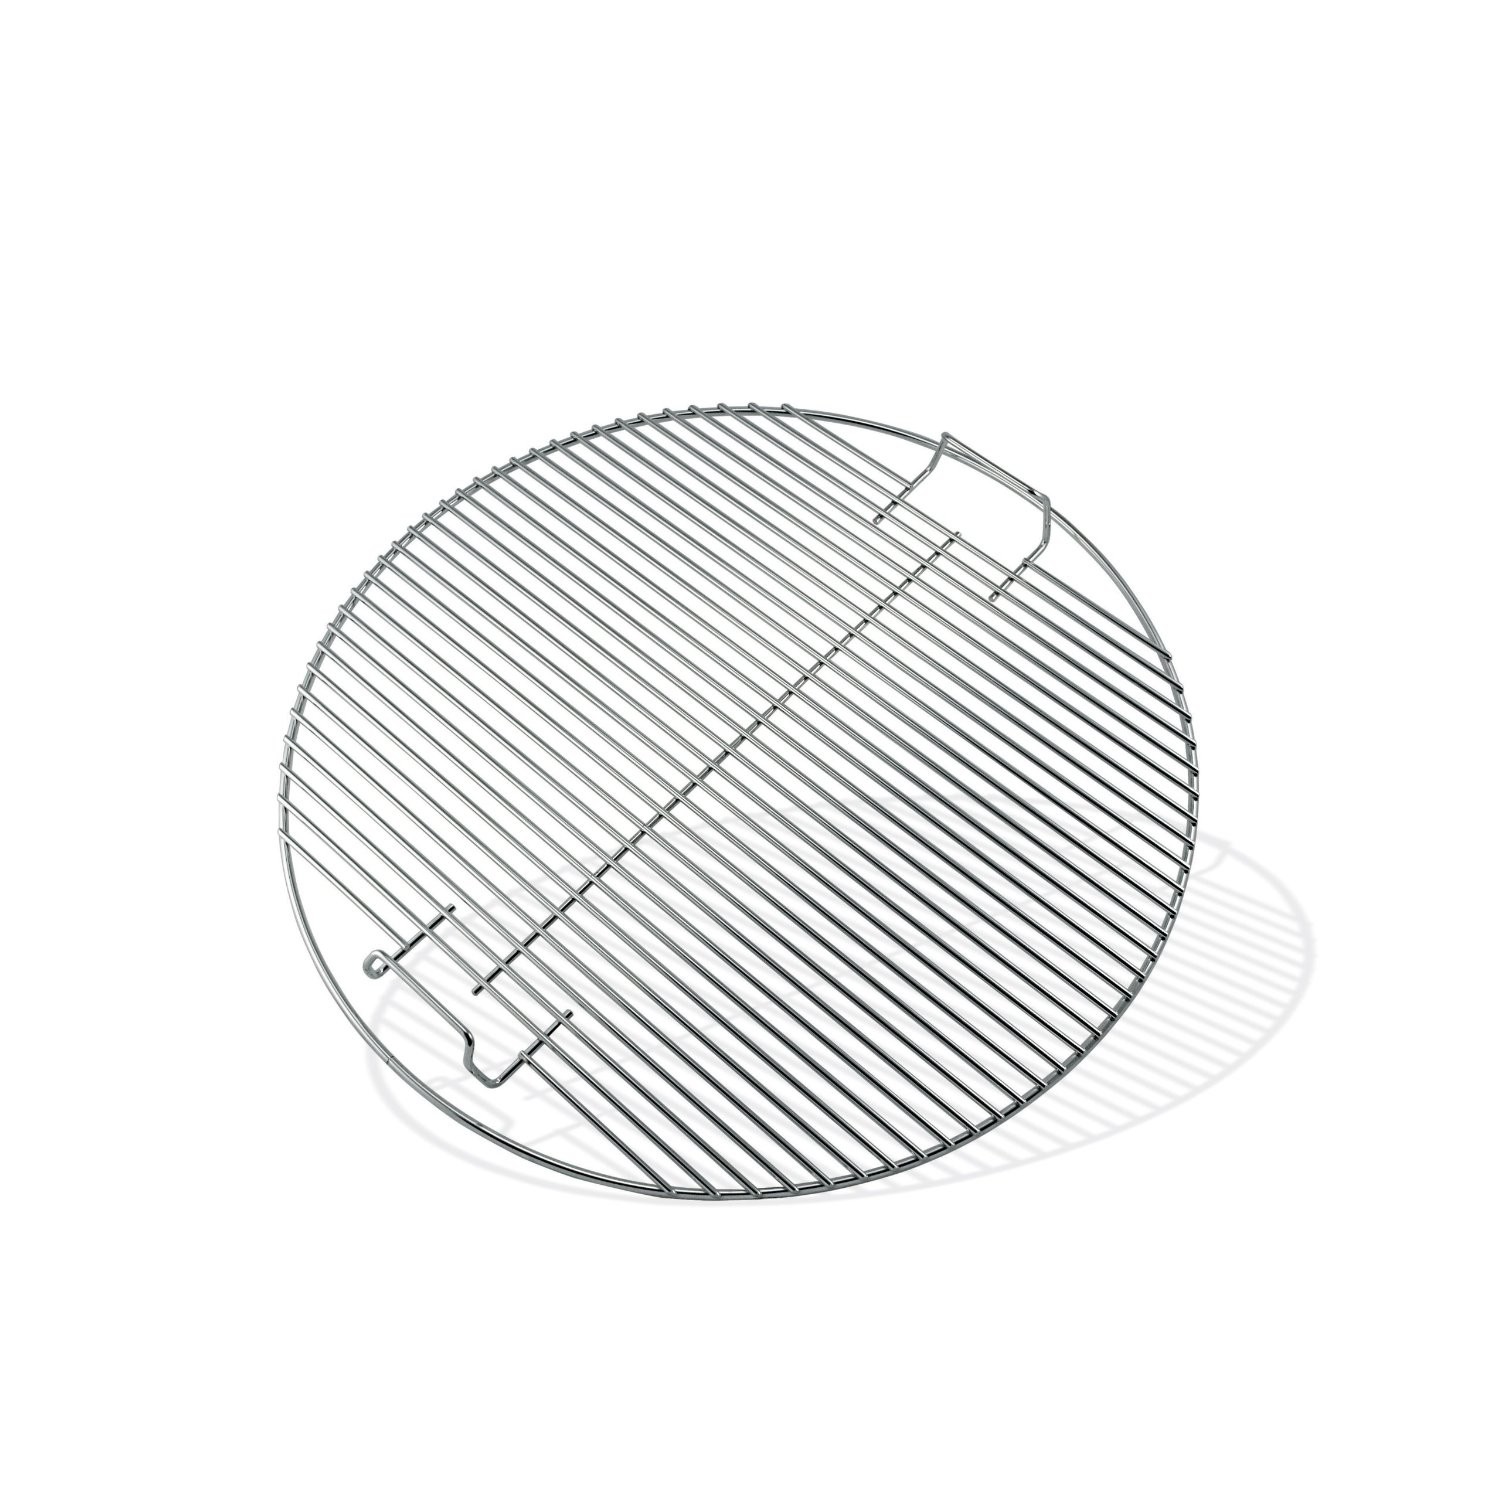 Weber 57cm Chrome Plated Cooking Grate